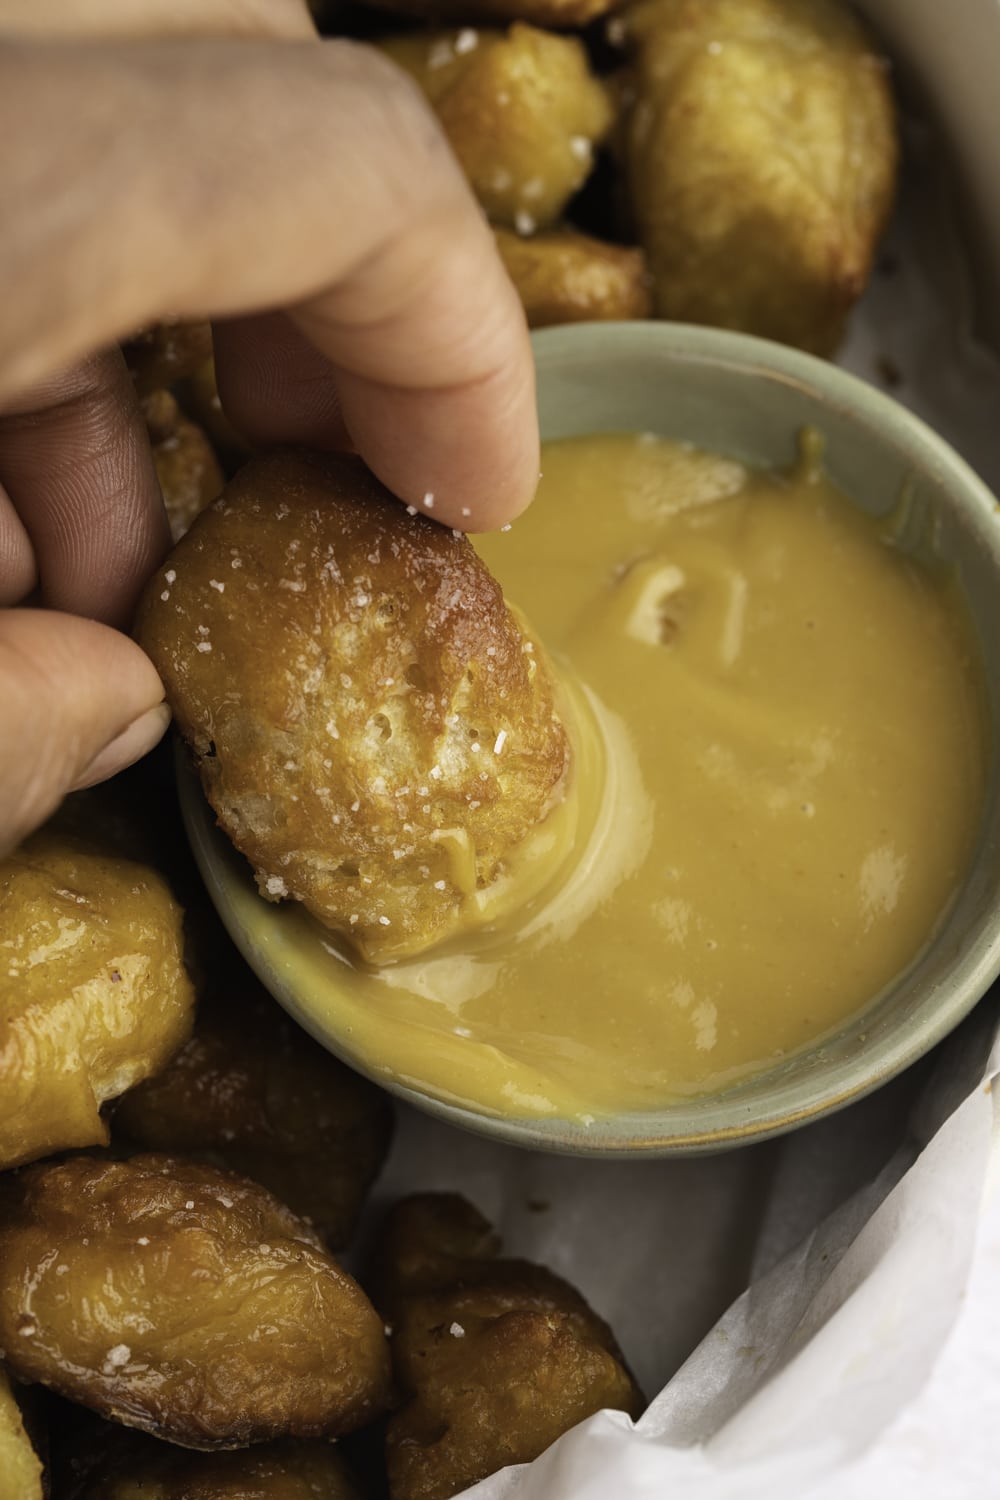 Soft pretzel bites dipped in a buttery sauce.